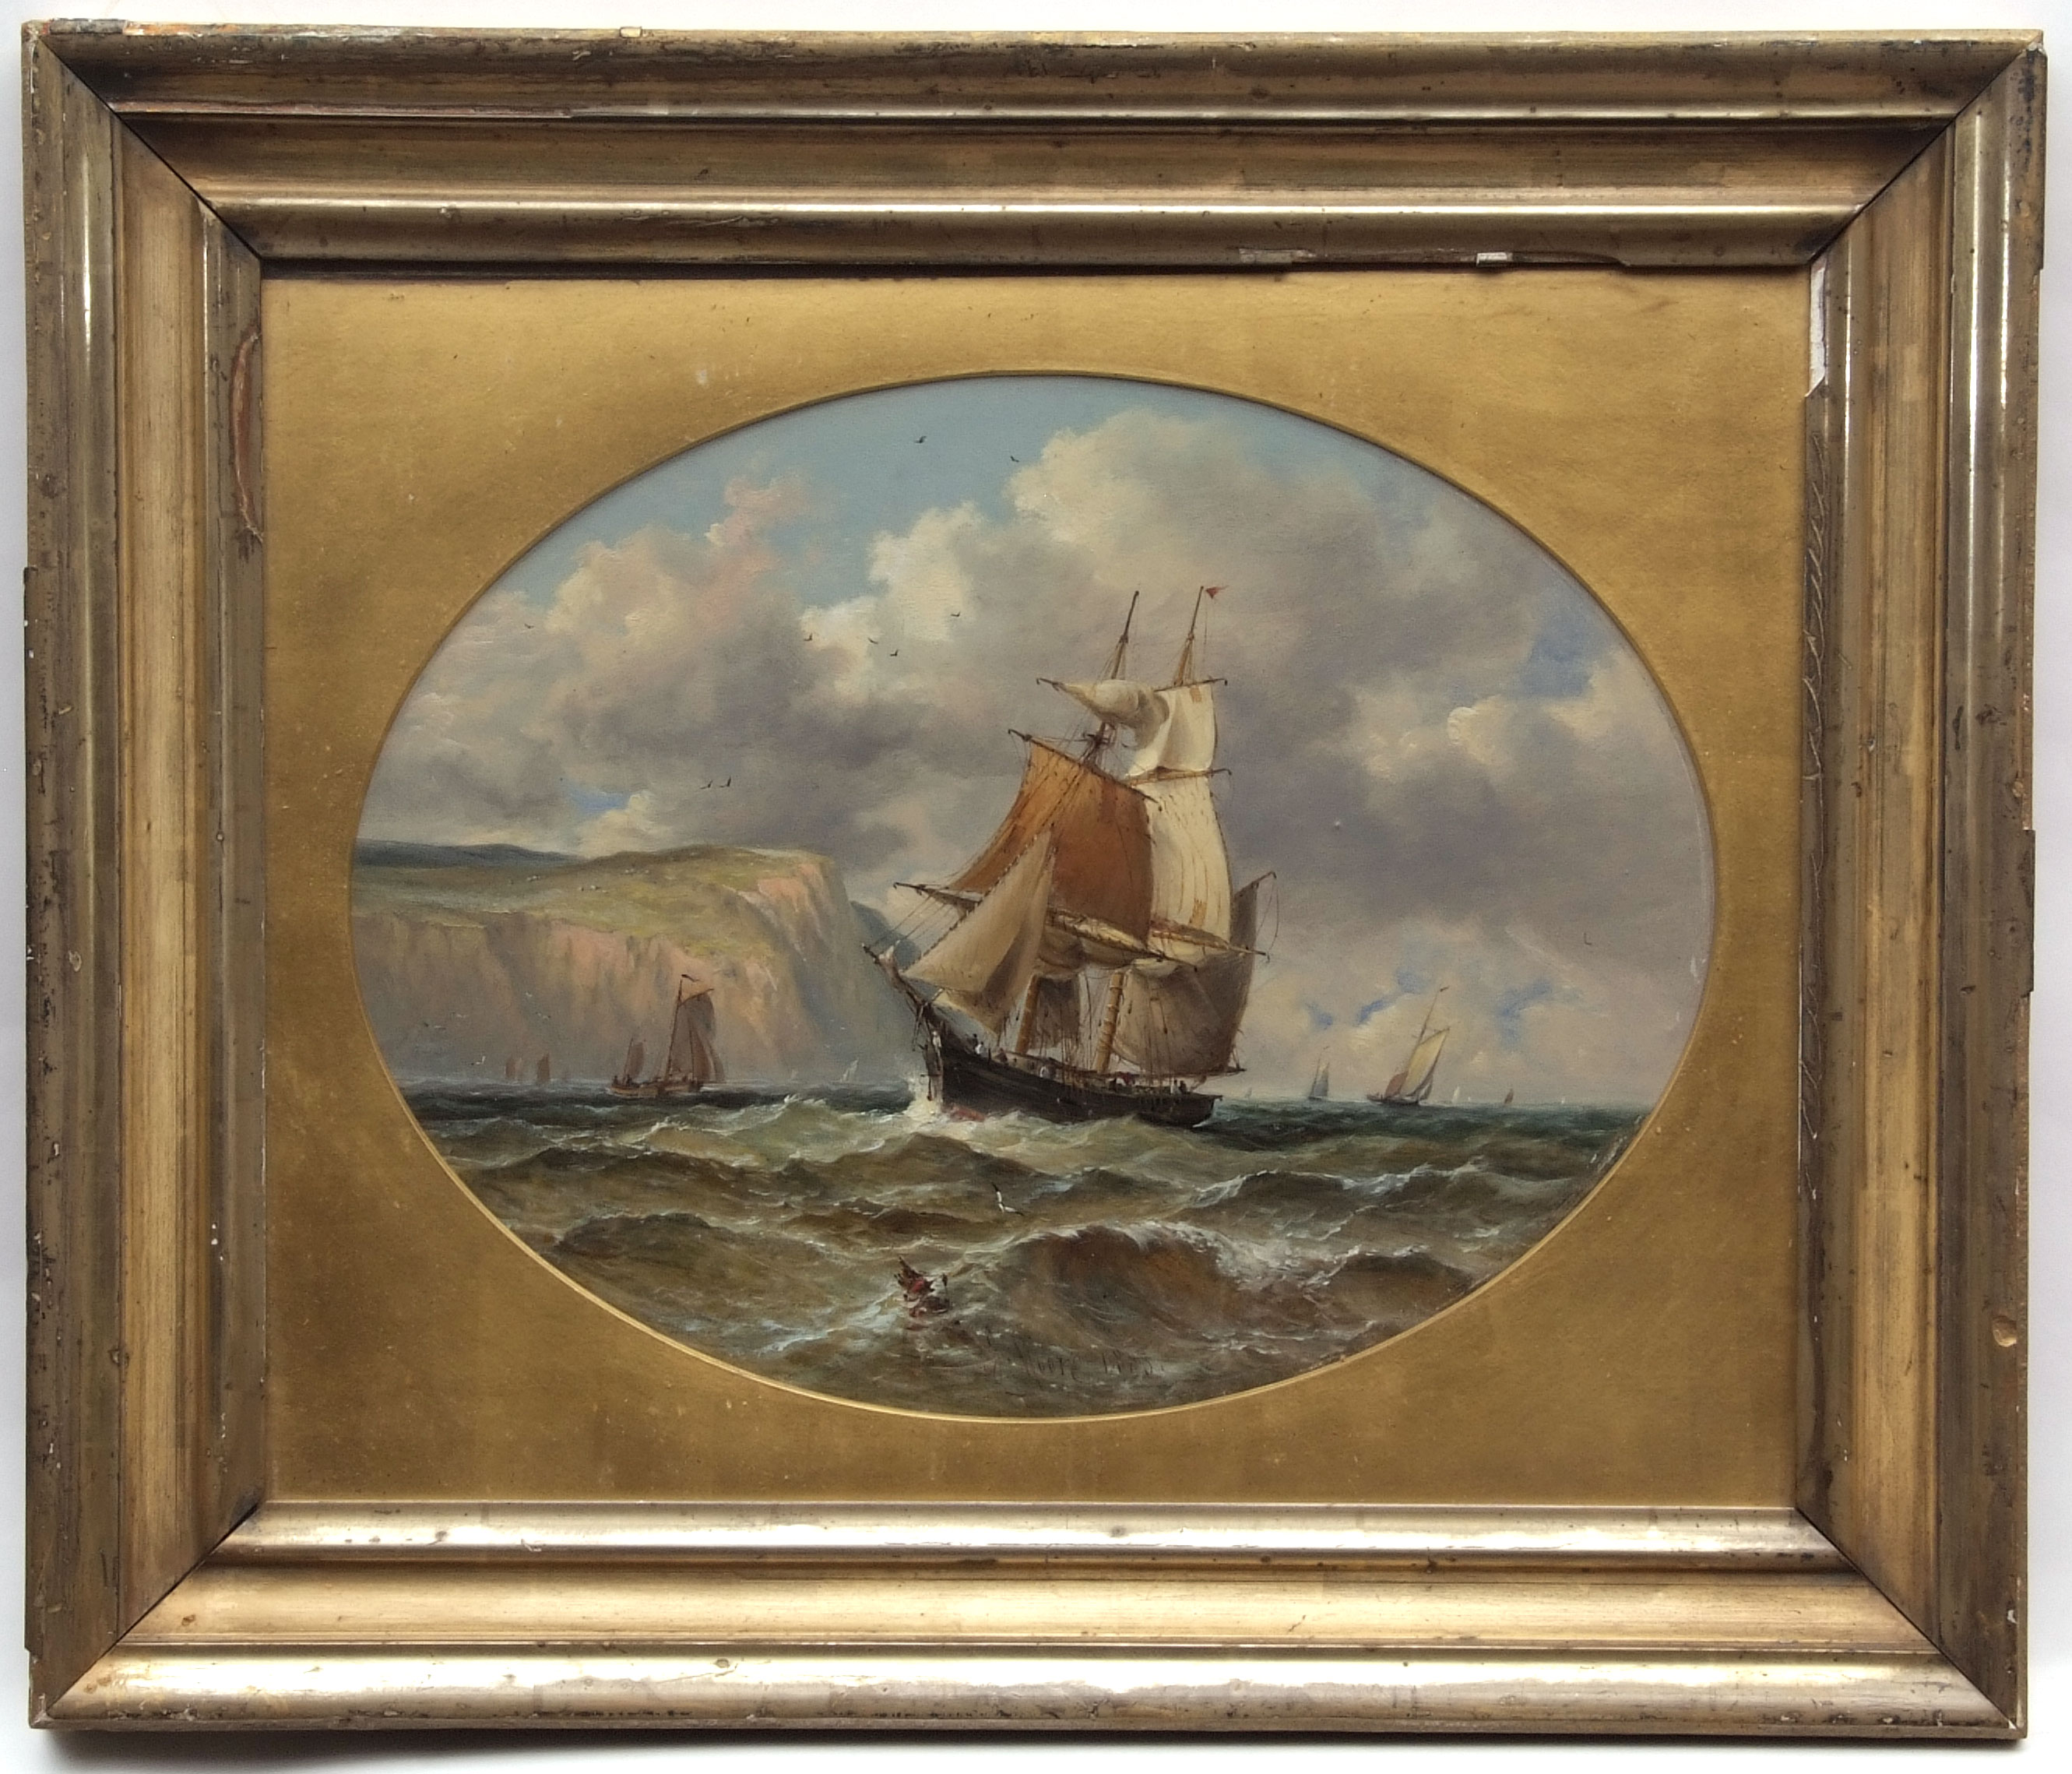 JOHN MOORE OF IPSWICH (1820-1902) Sailing boats off the cliffs oil on board, signed and dated 1883 - Image 2 of 2